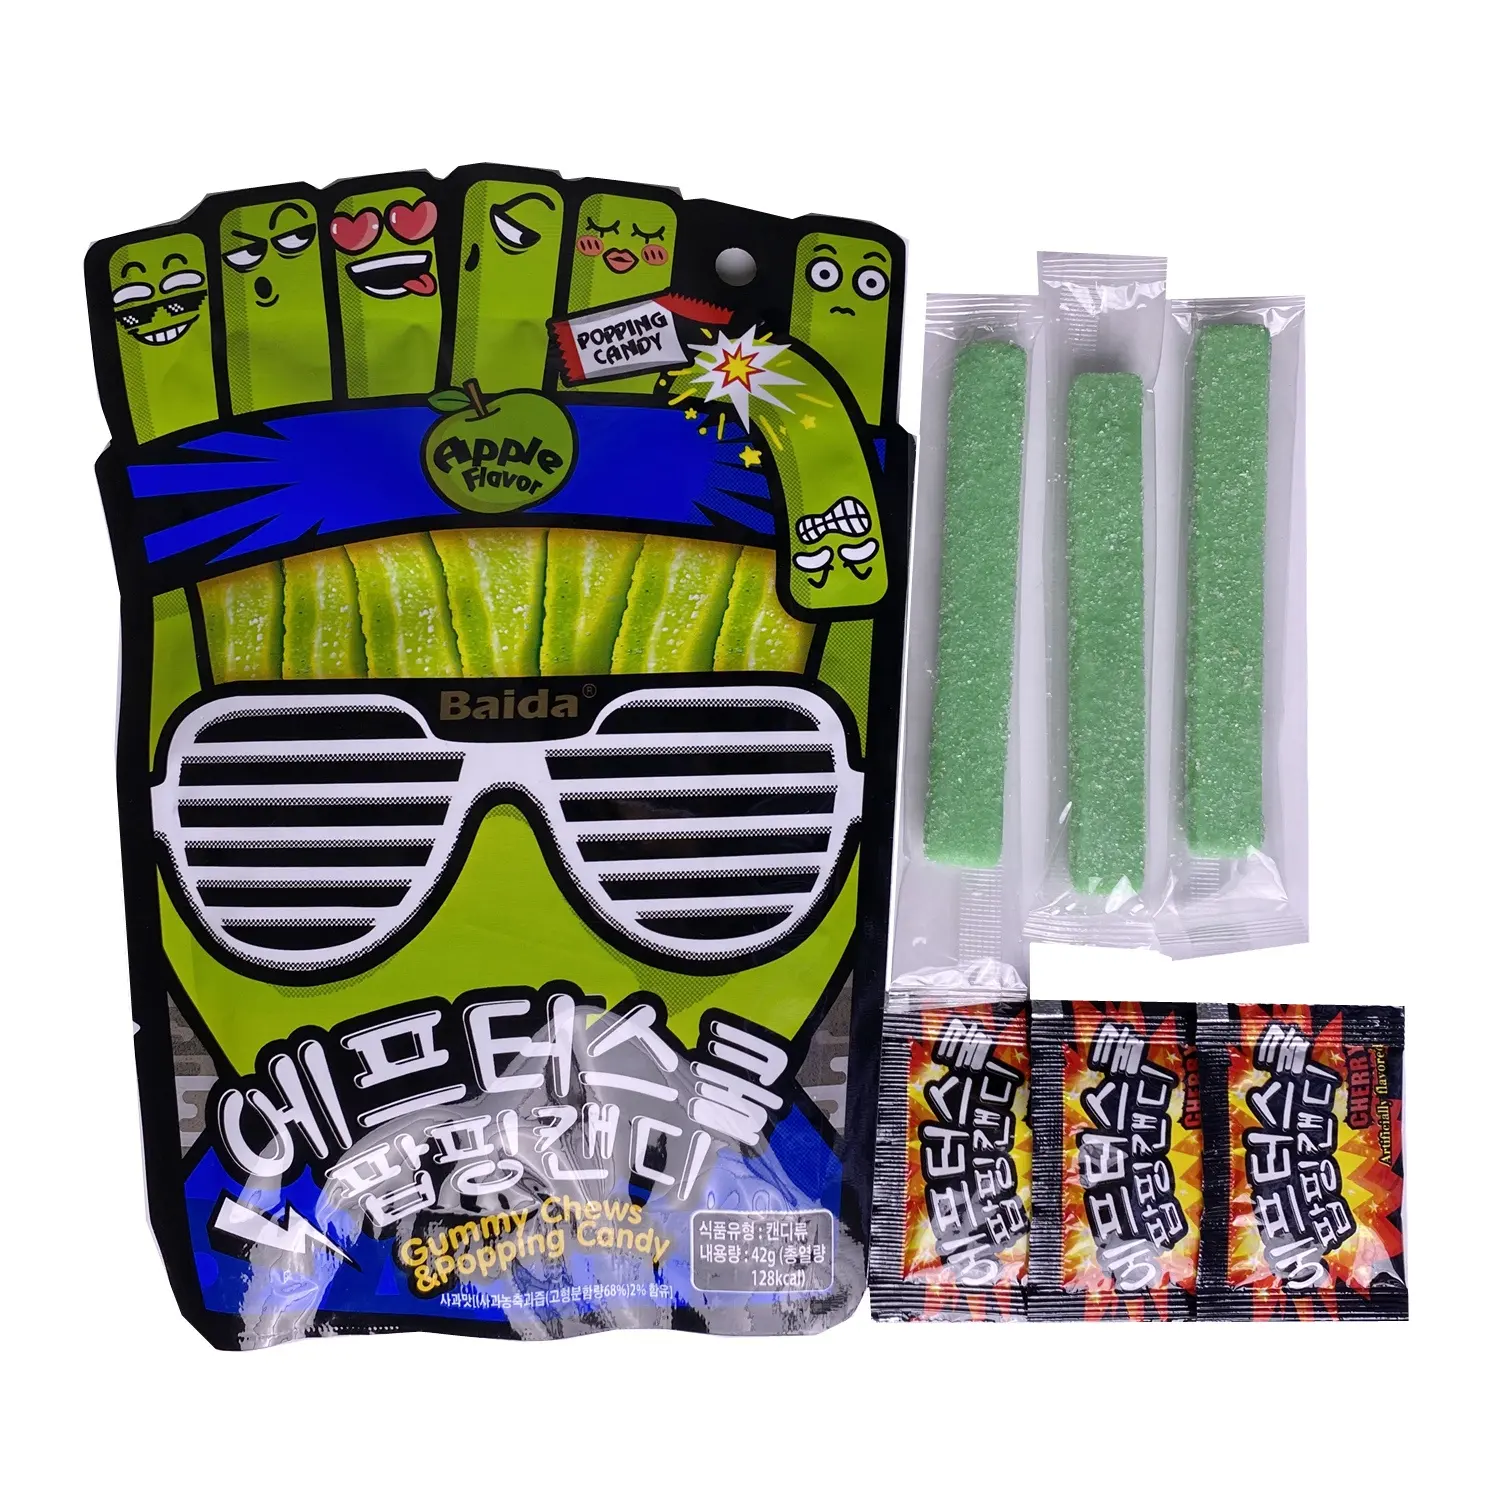 Baida 42g Diy candy Fashion fries apply flavor Gummy chews&popping candy kit with hanging strip